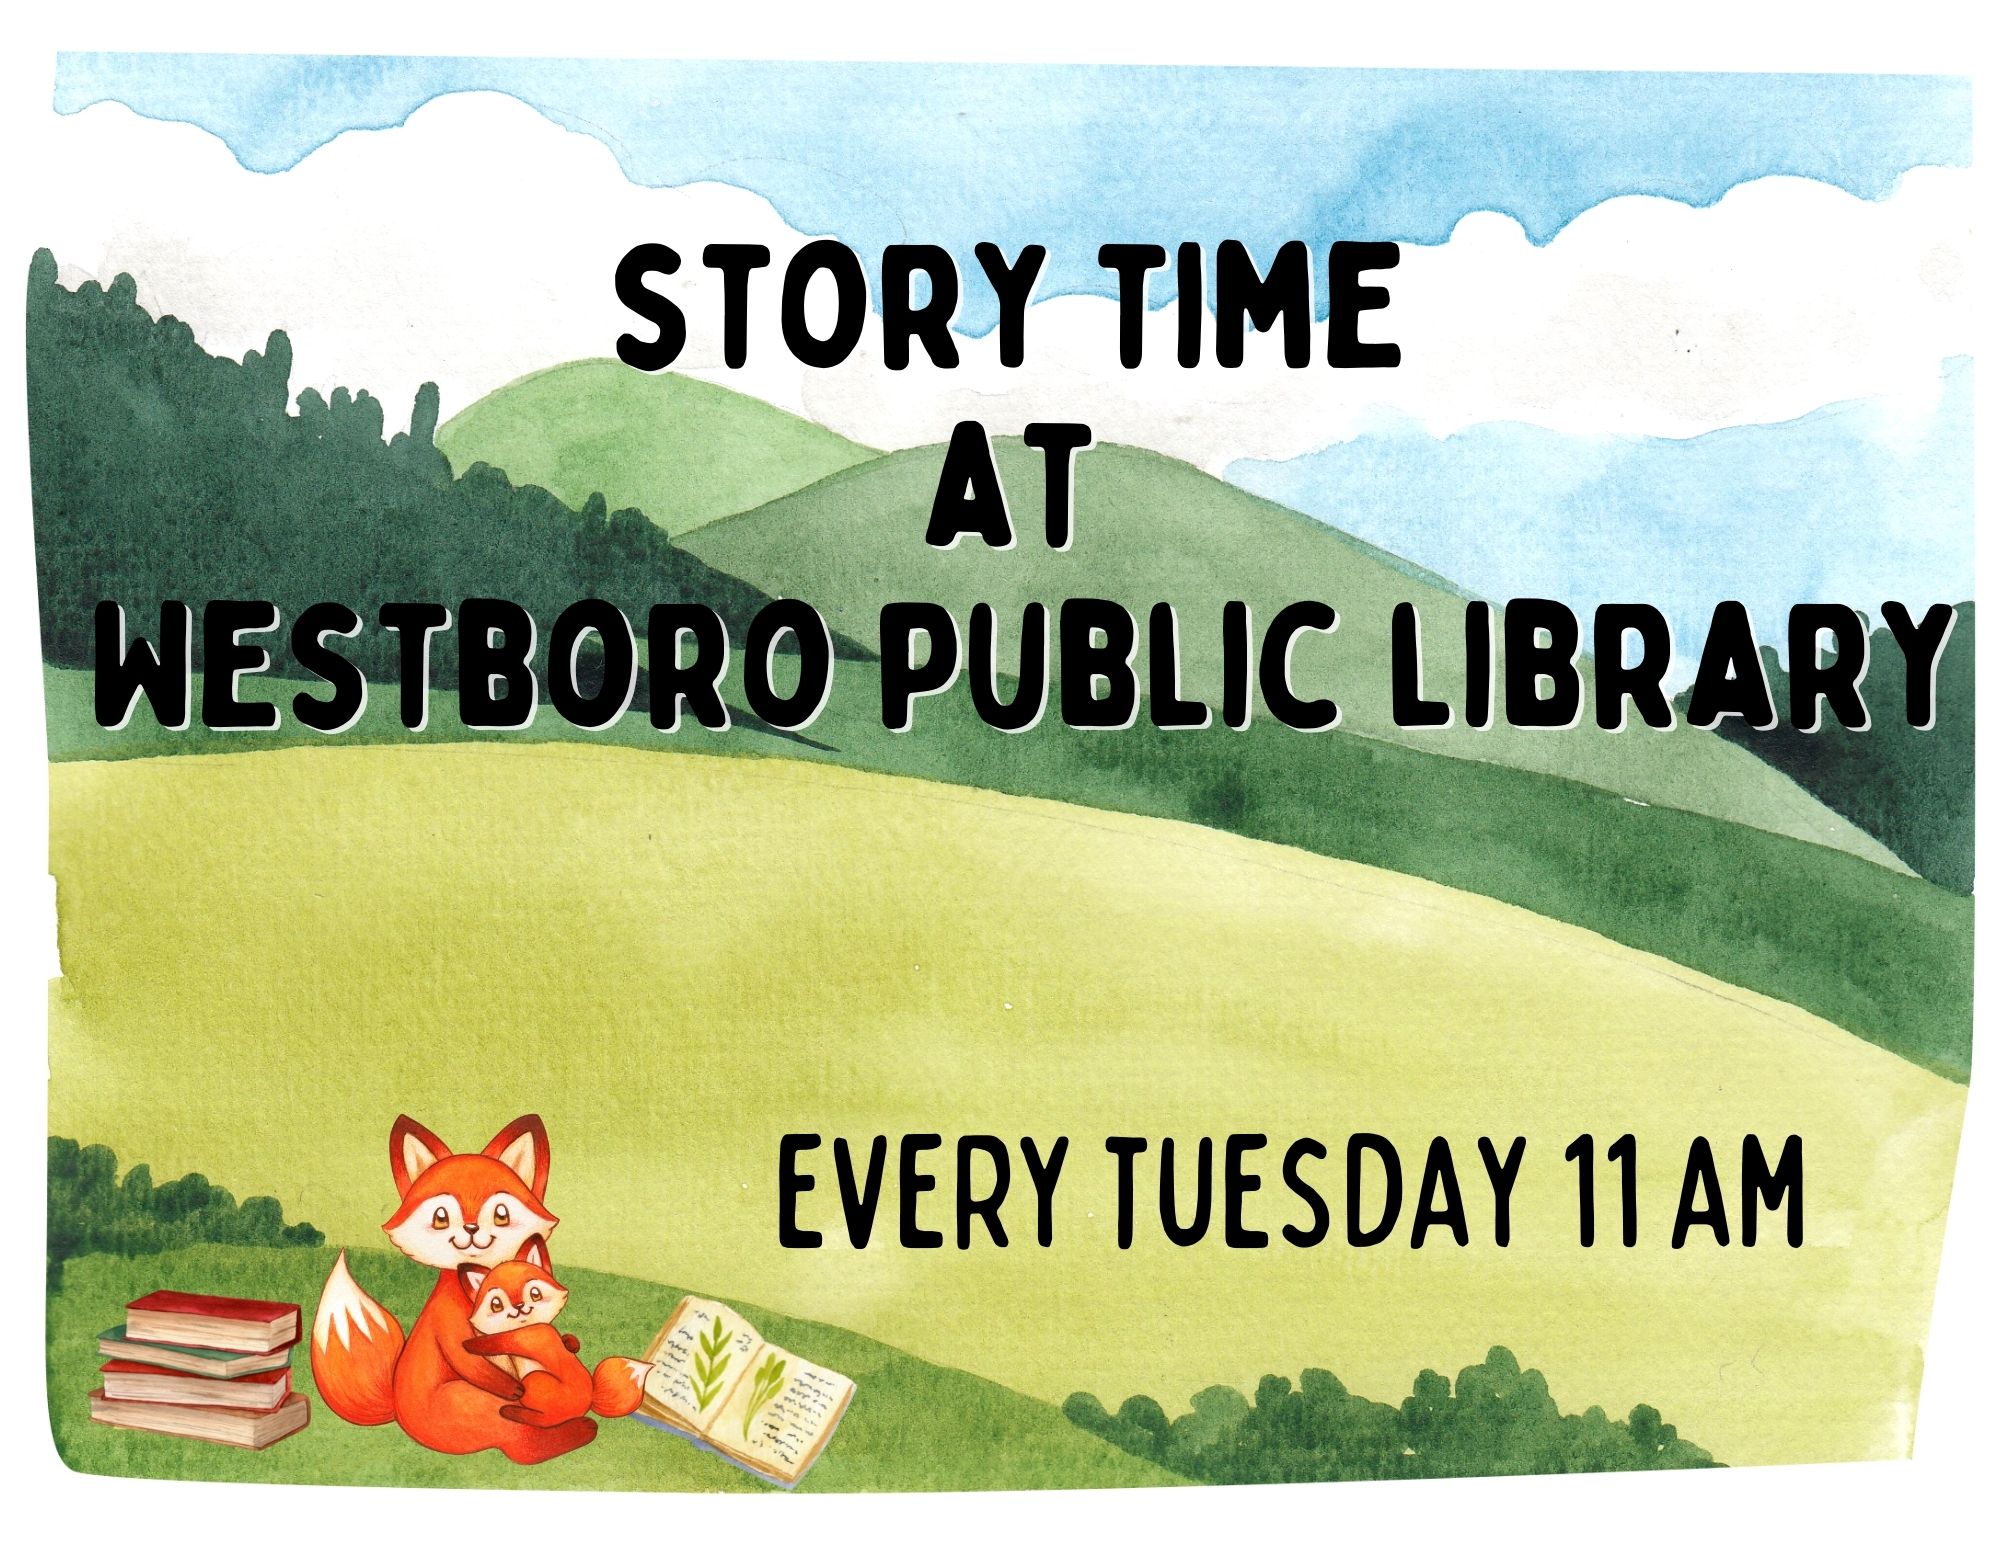 Westboro Story time tuesdays at 11am